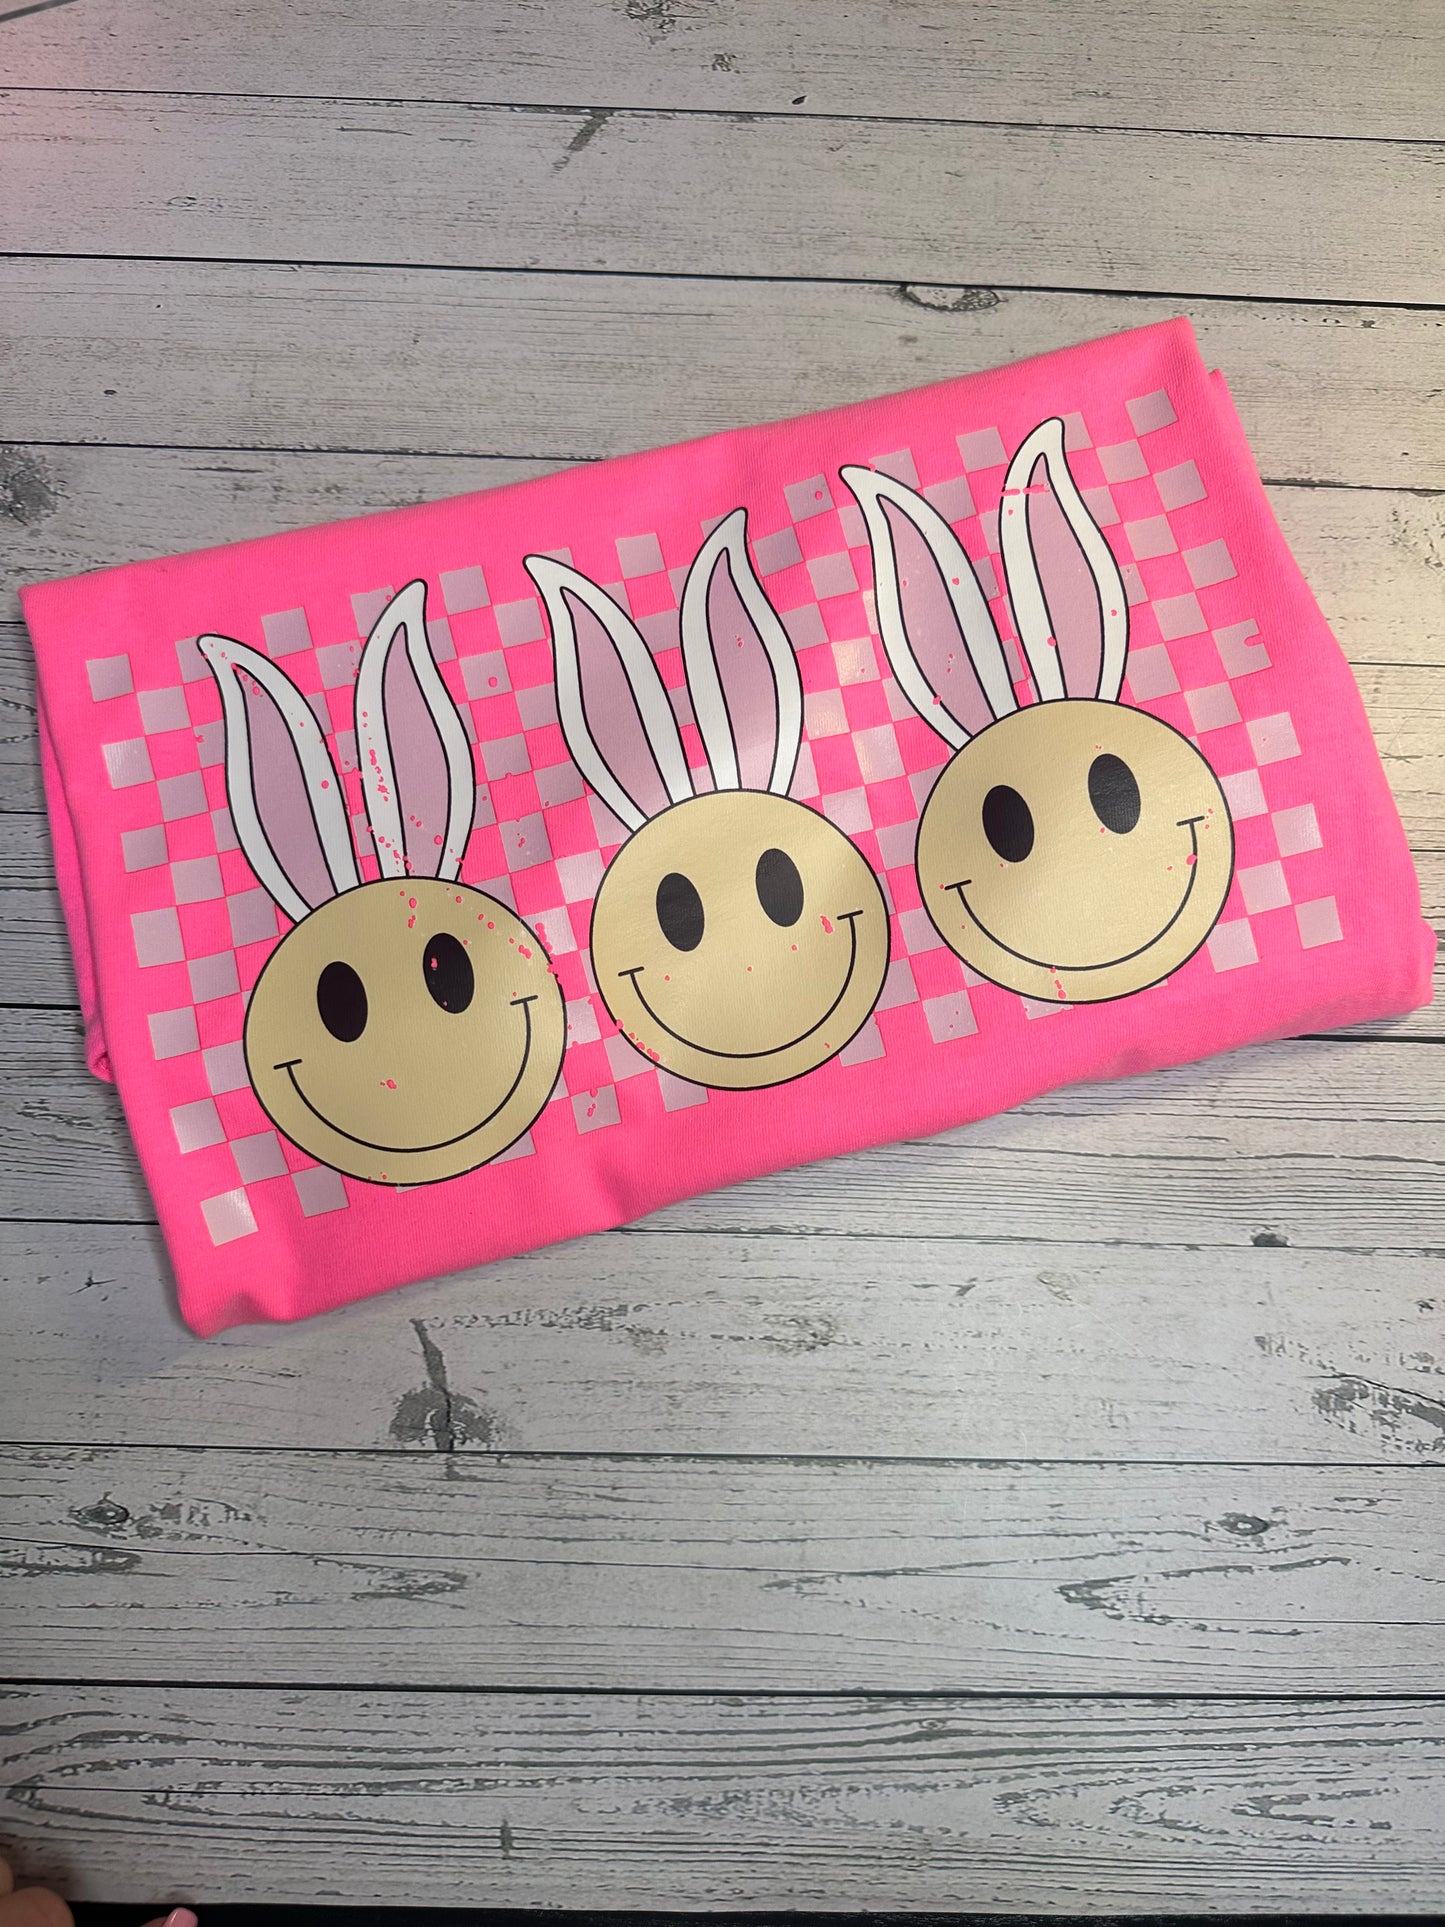 Retro Easter Bunny Tee on a Hot Pink Comfort Colors